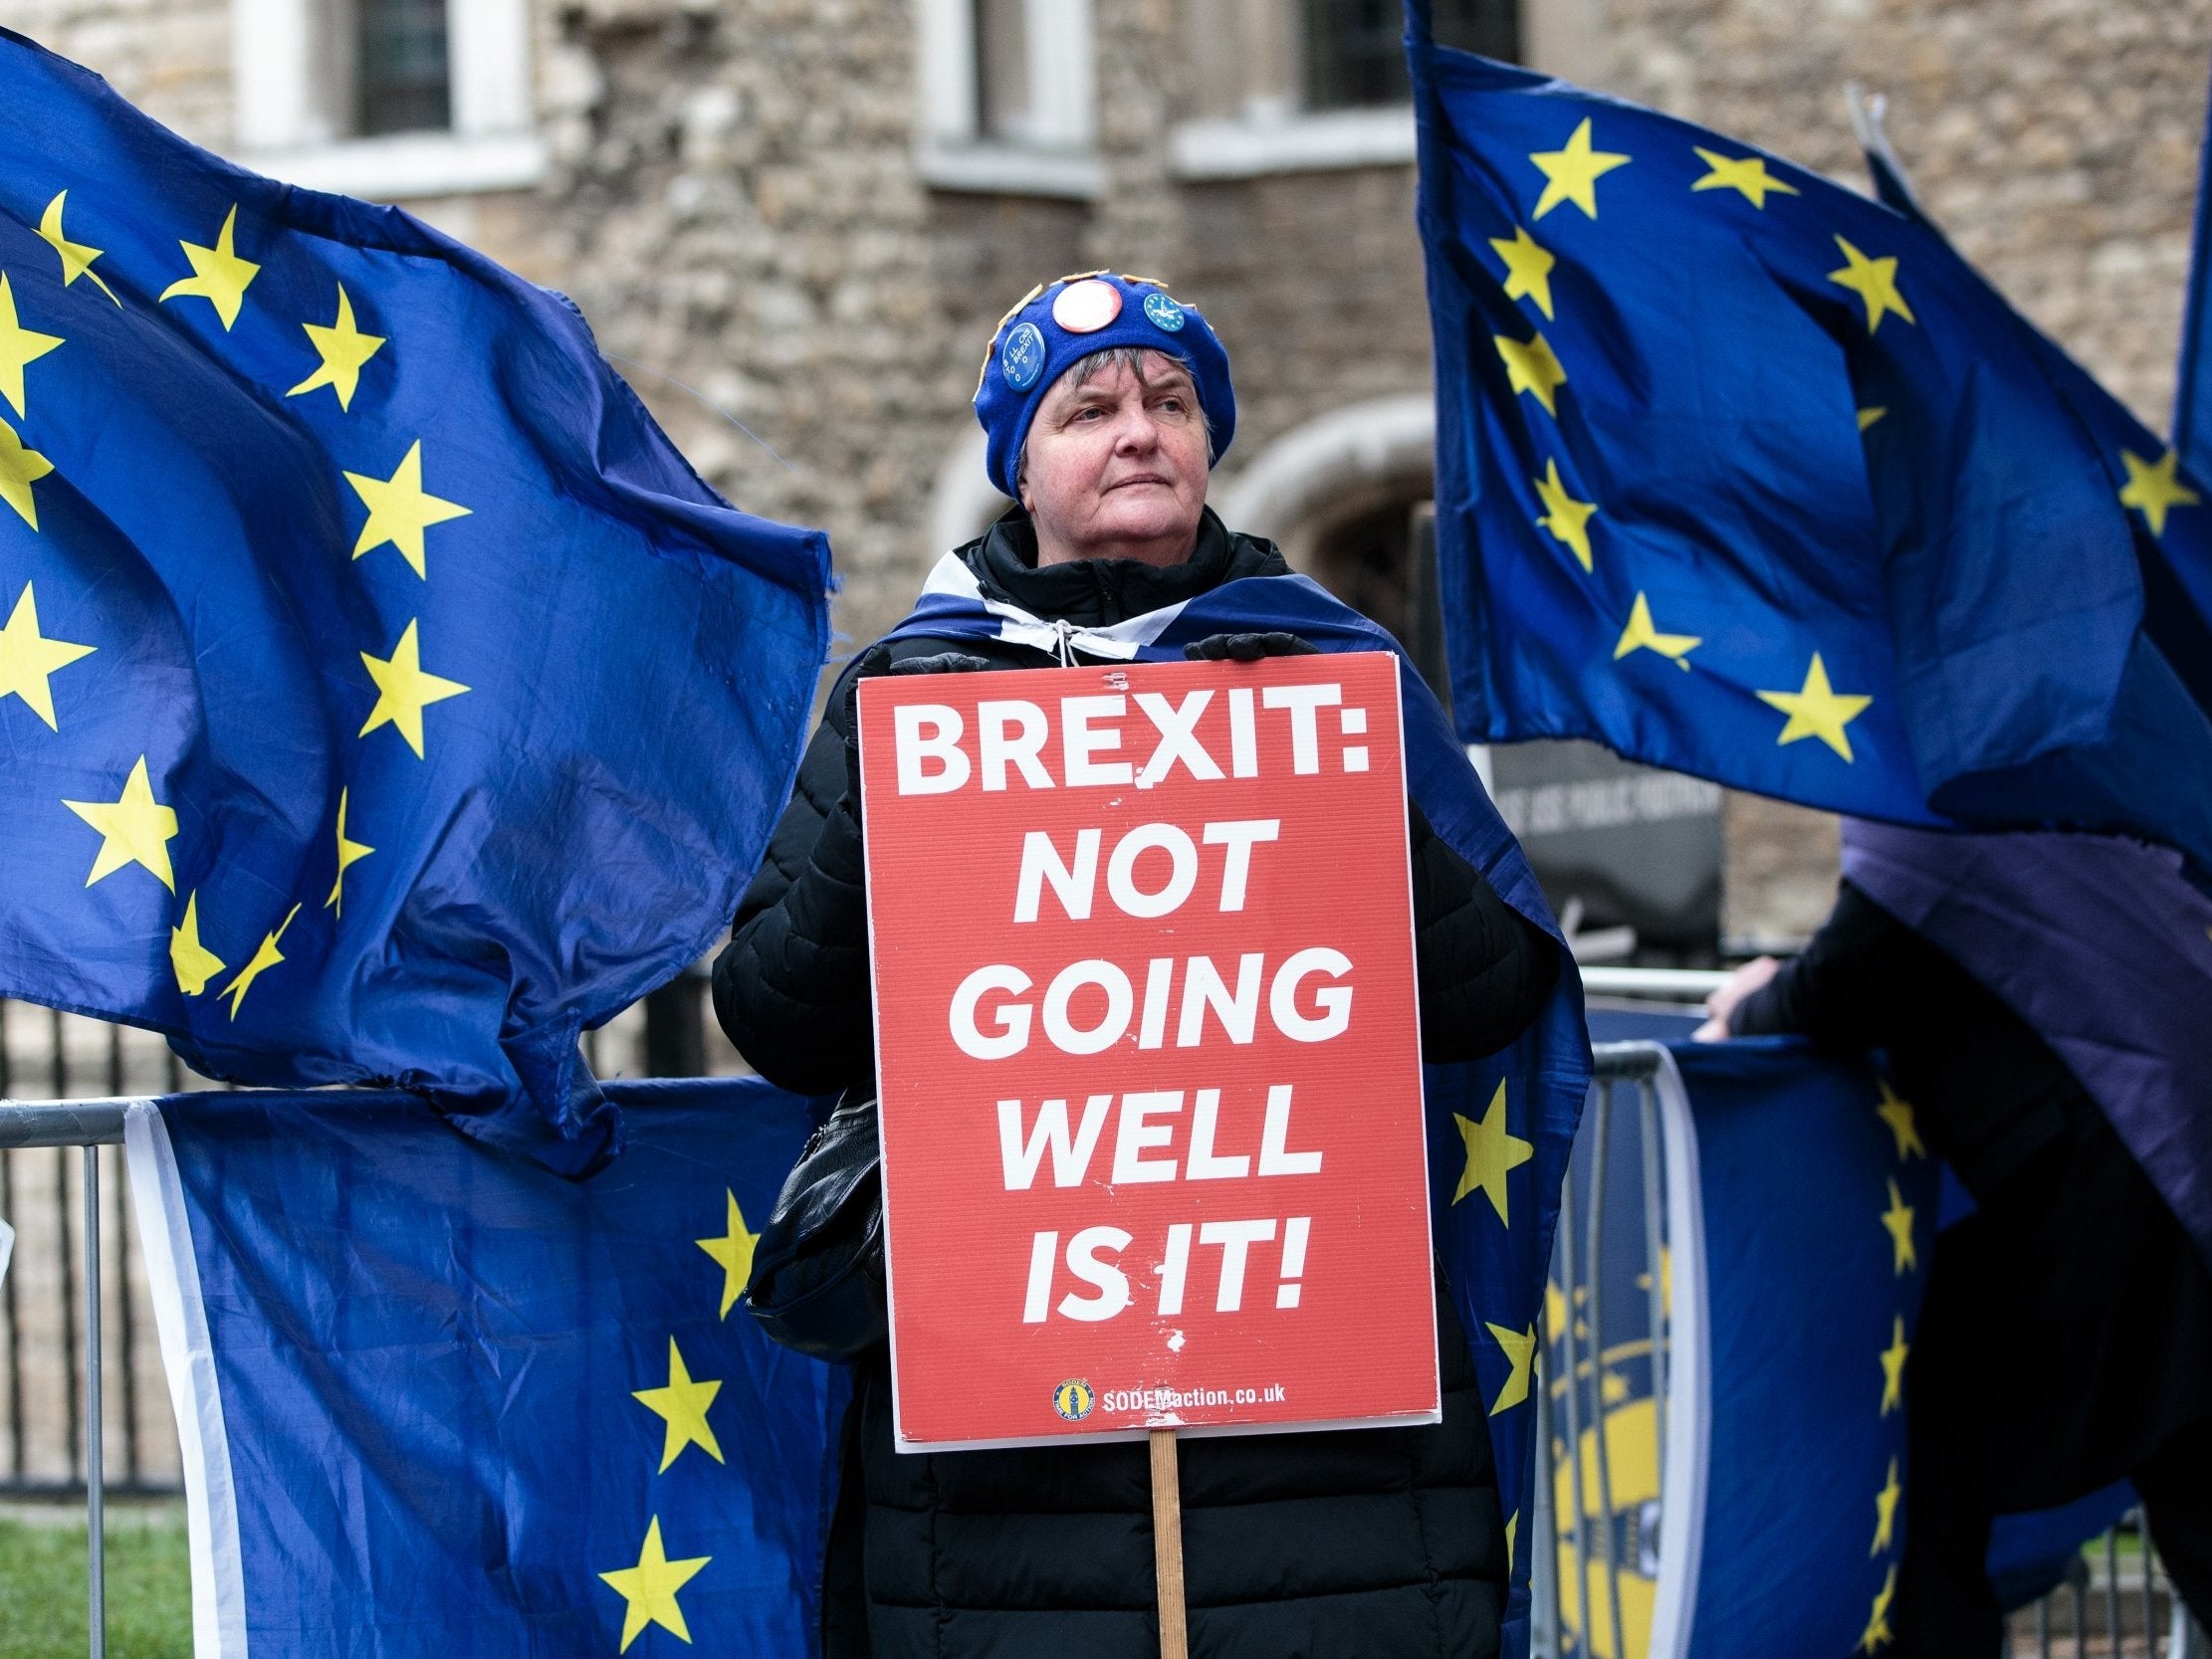 Remain activists have spent the day crowing at Brexiteers over Britain's failure to leave the EU